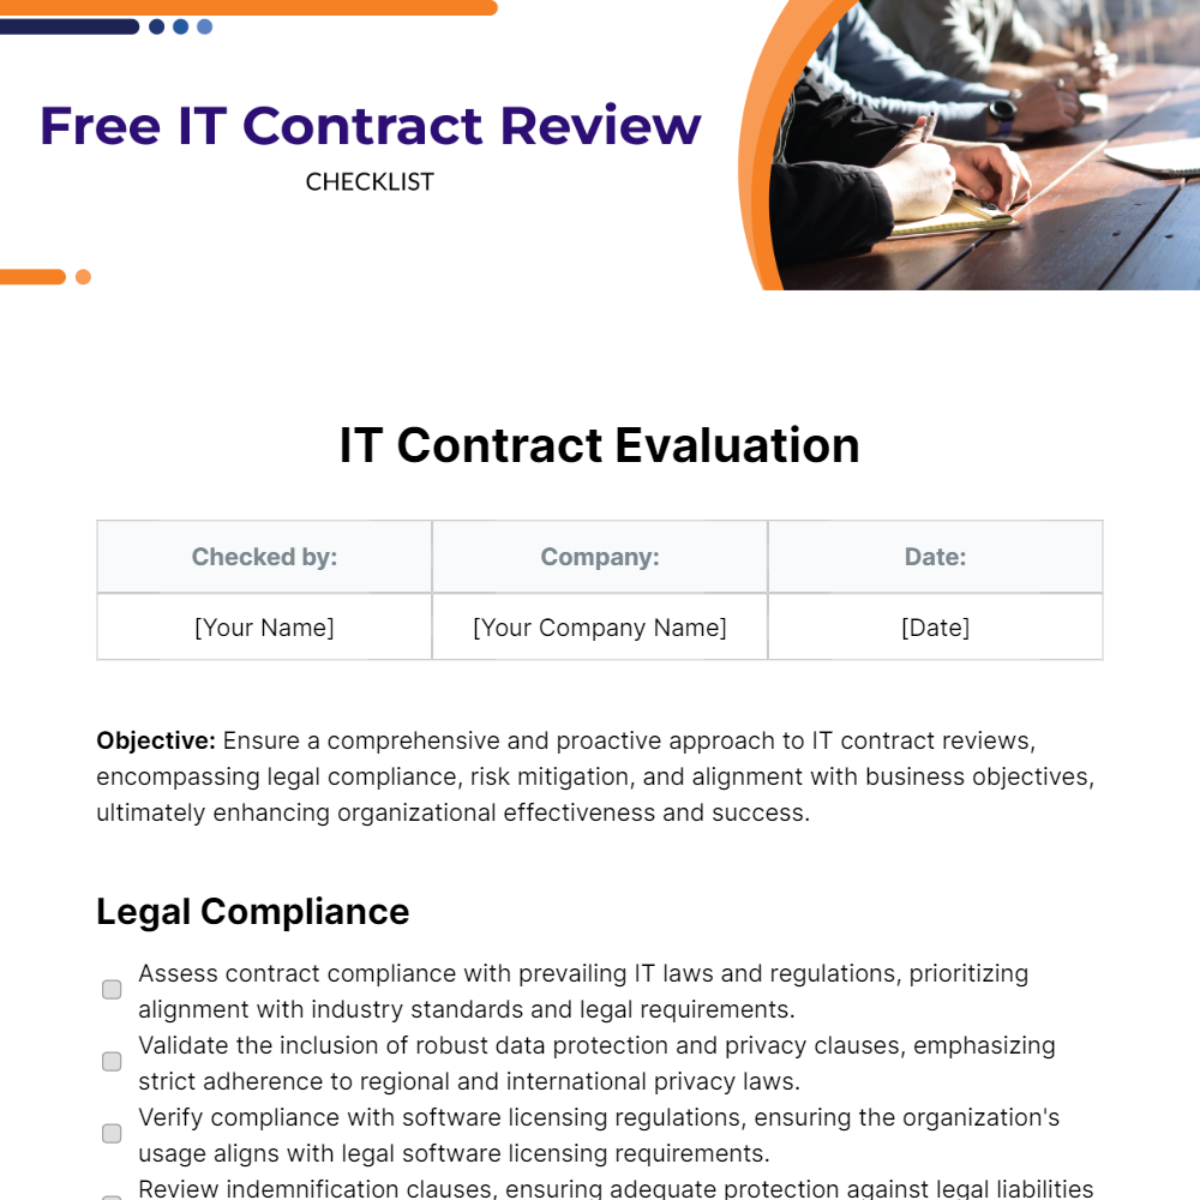 IT Contract Review Checklist Template